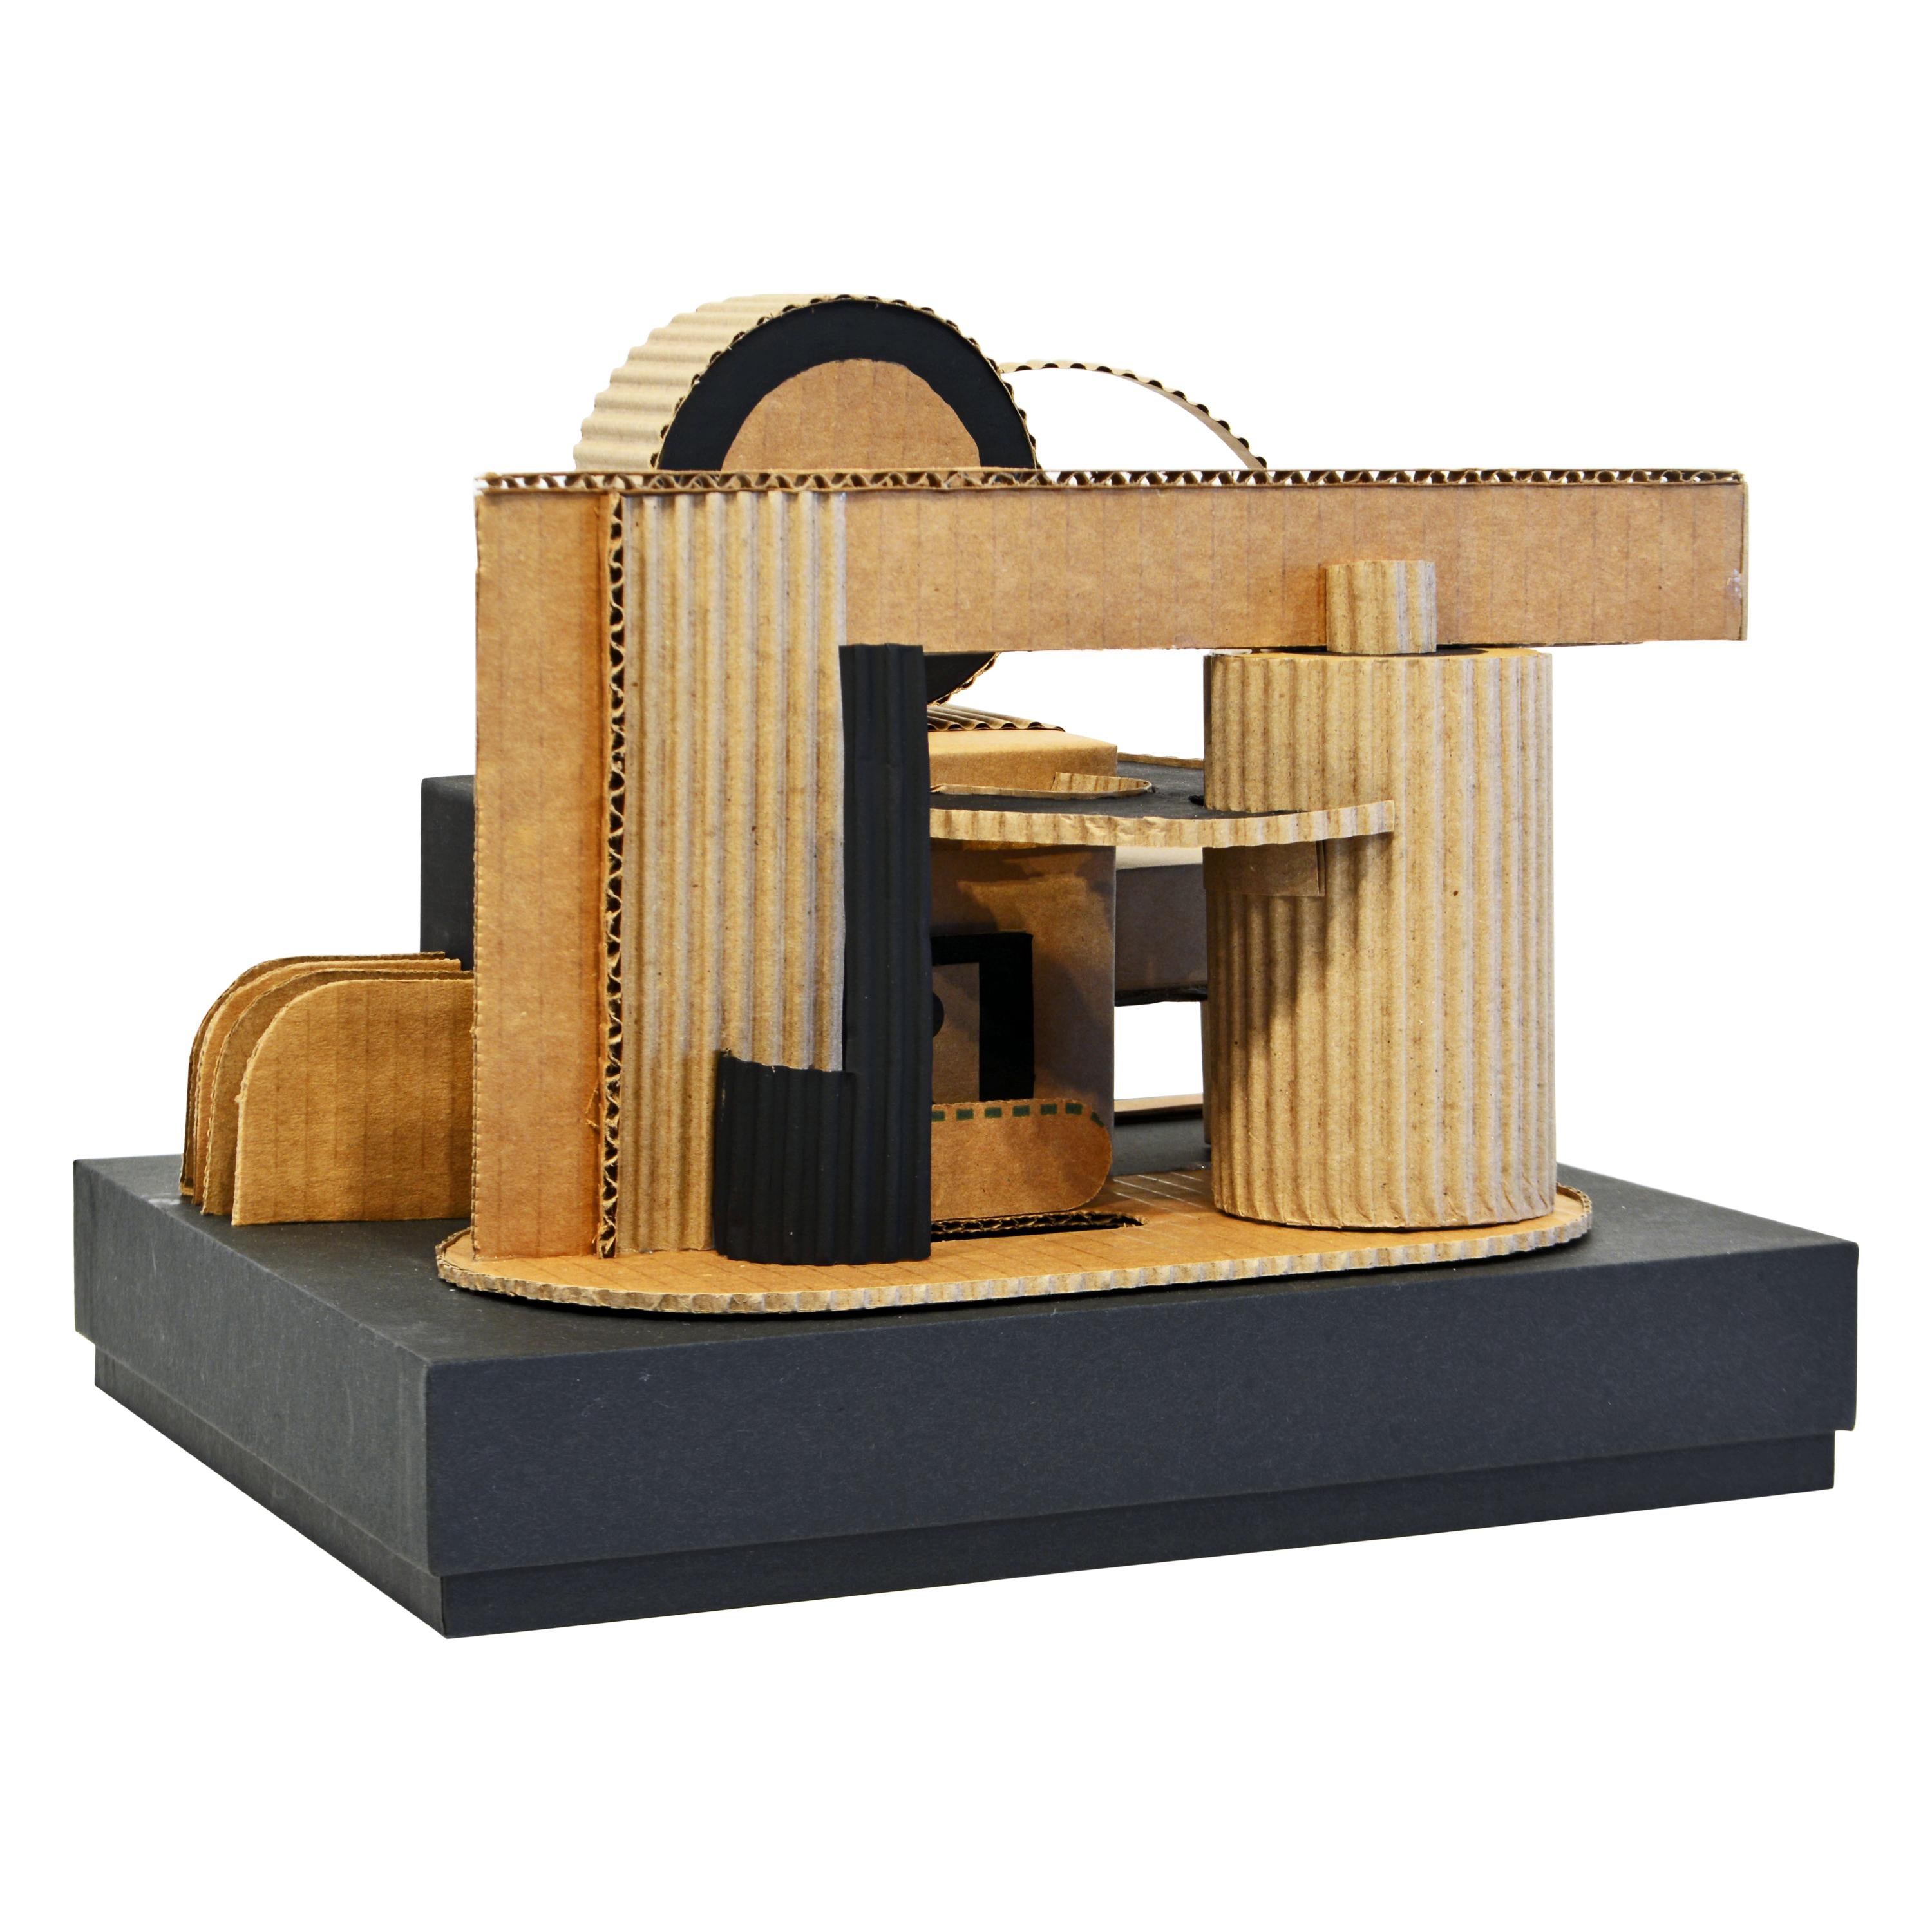 Cubist Bauhaus Style Architectural Cardboard Table Sculpture by Virgil  Greca For Sale at 1stDibs